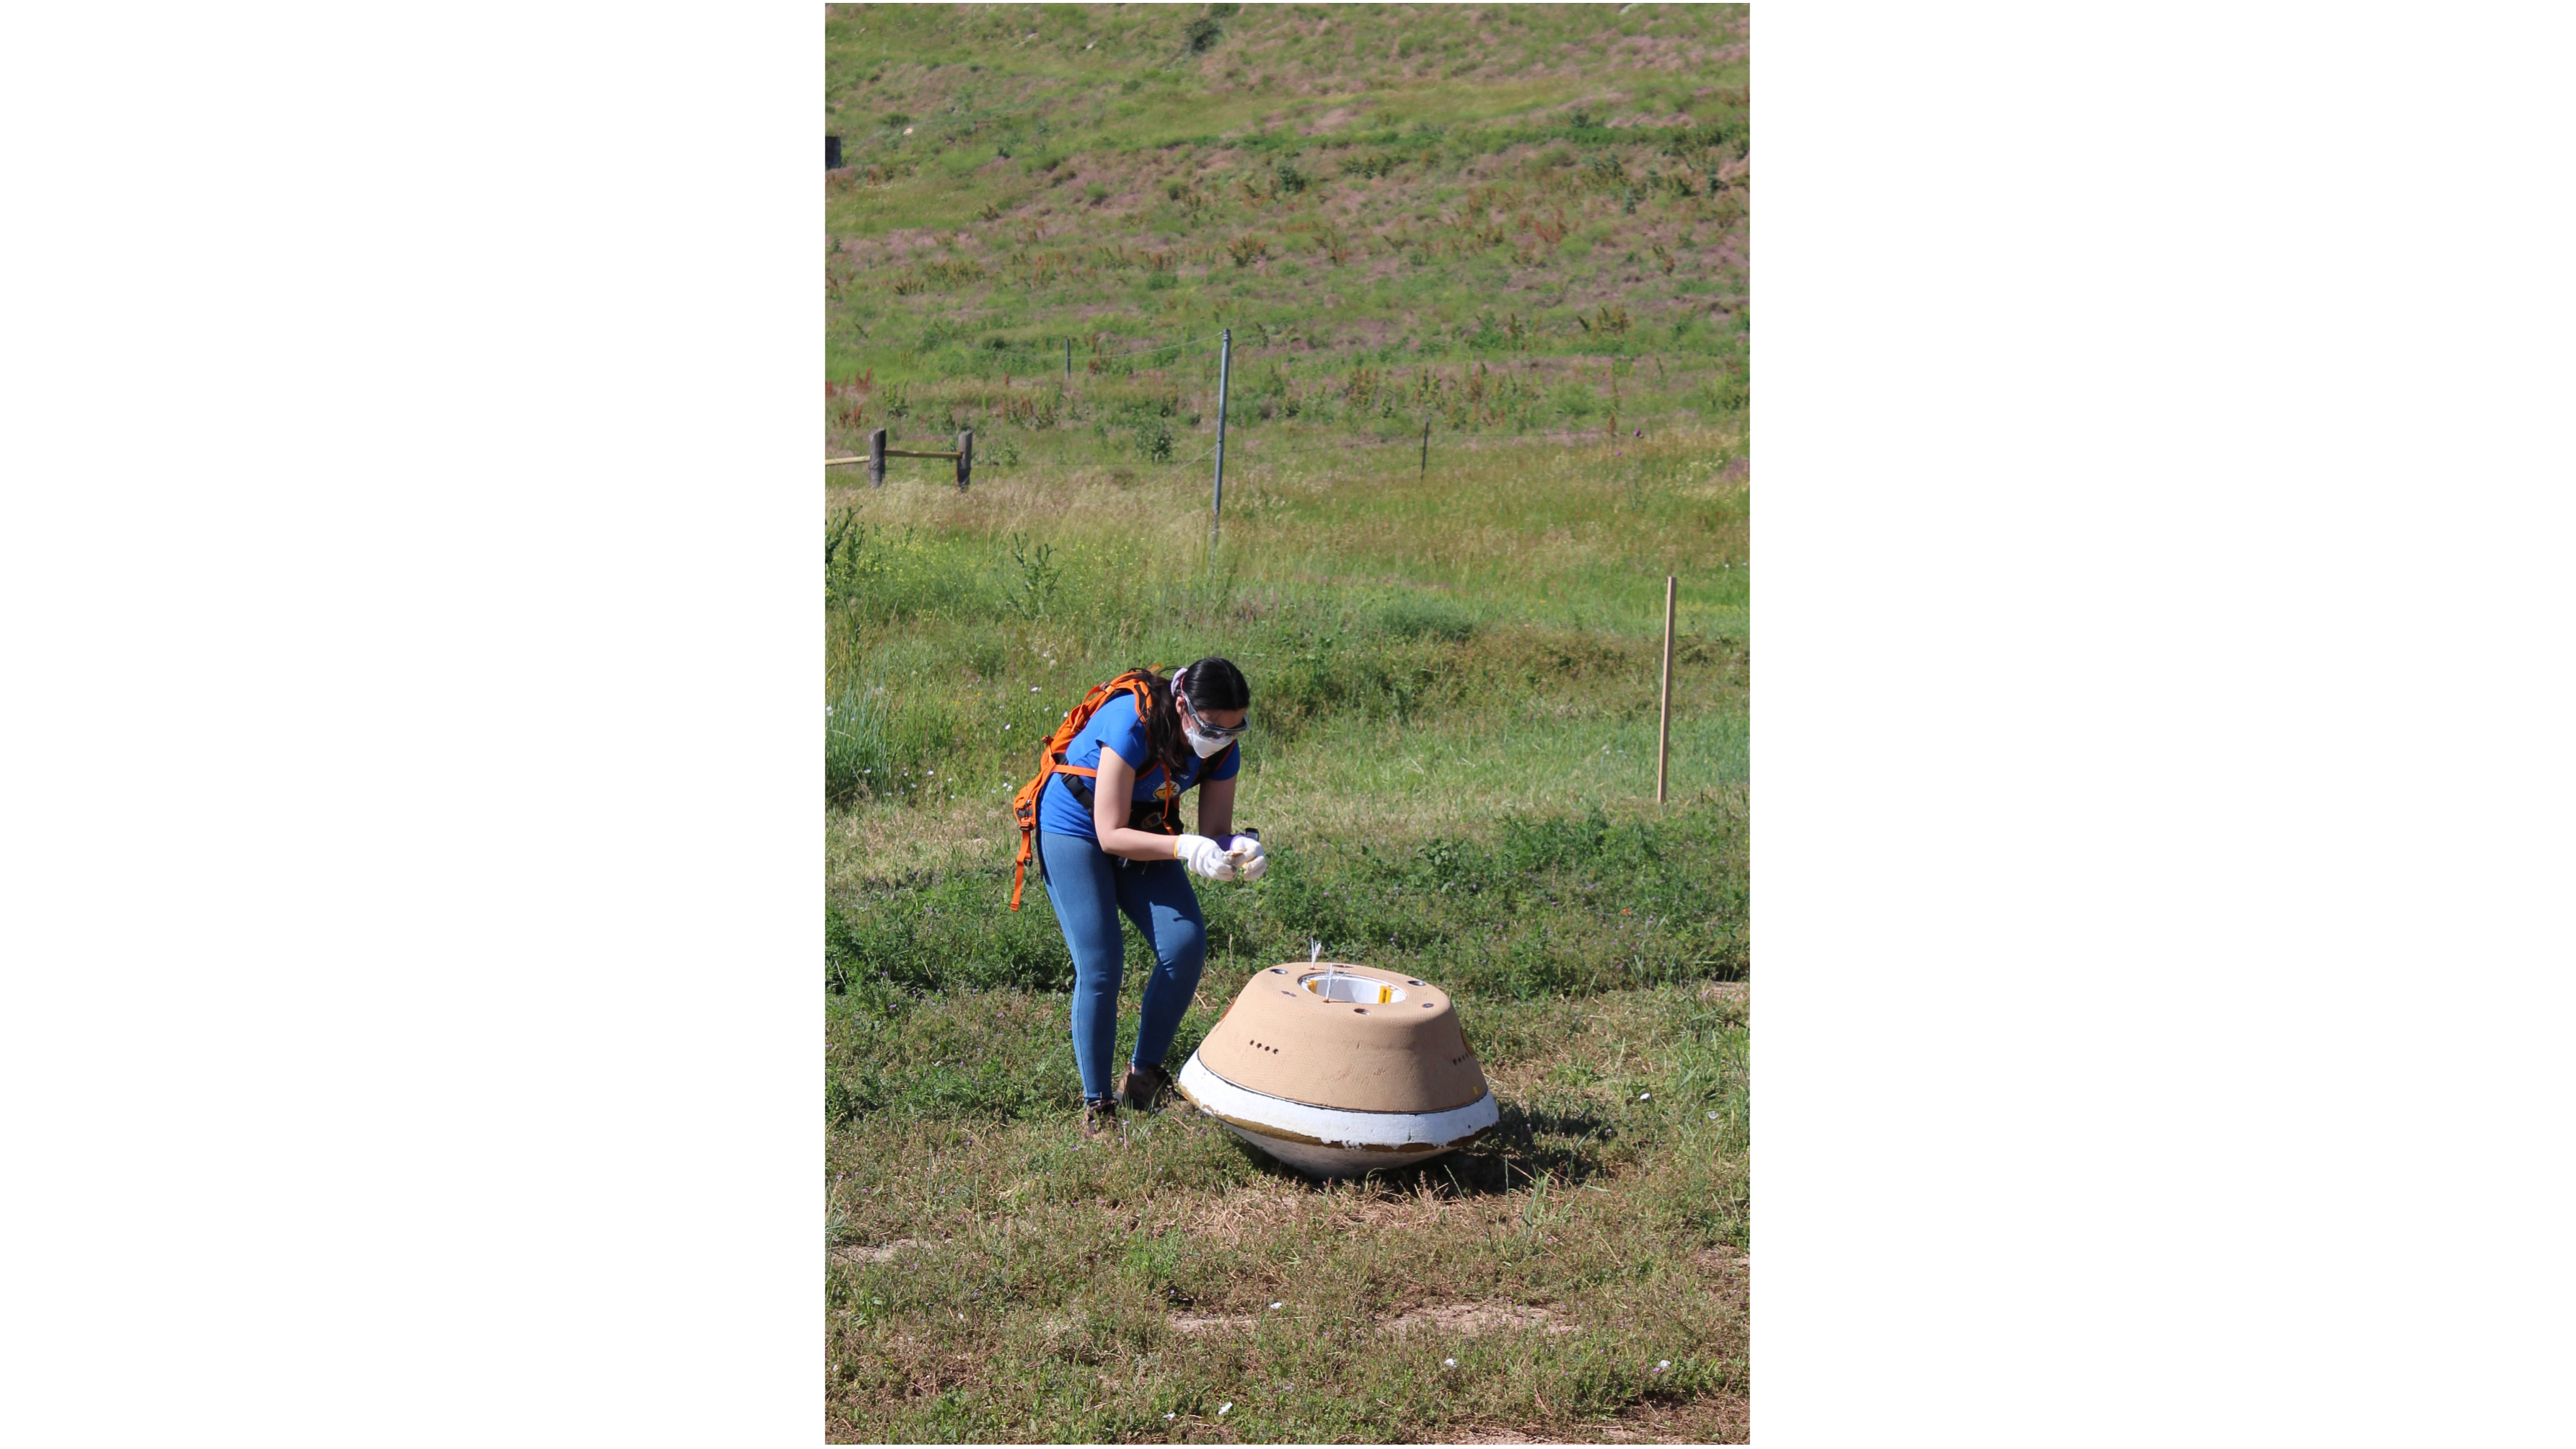 a woman examines a cylindrical mock space capsule in a grassy field